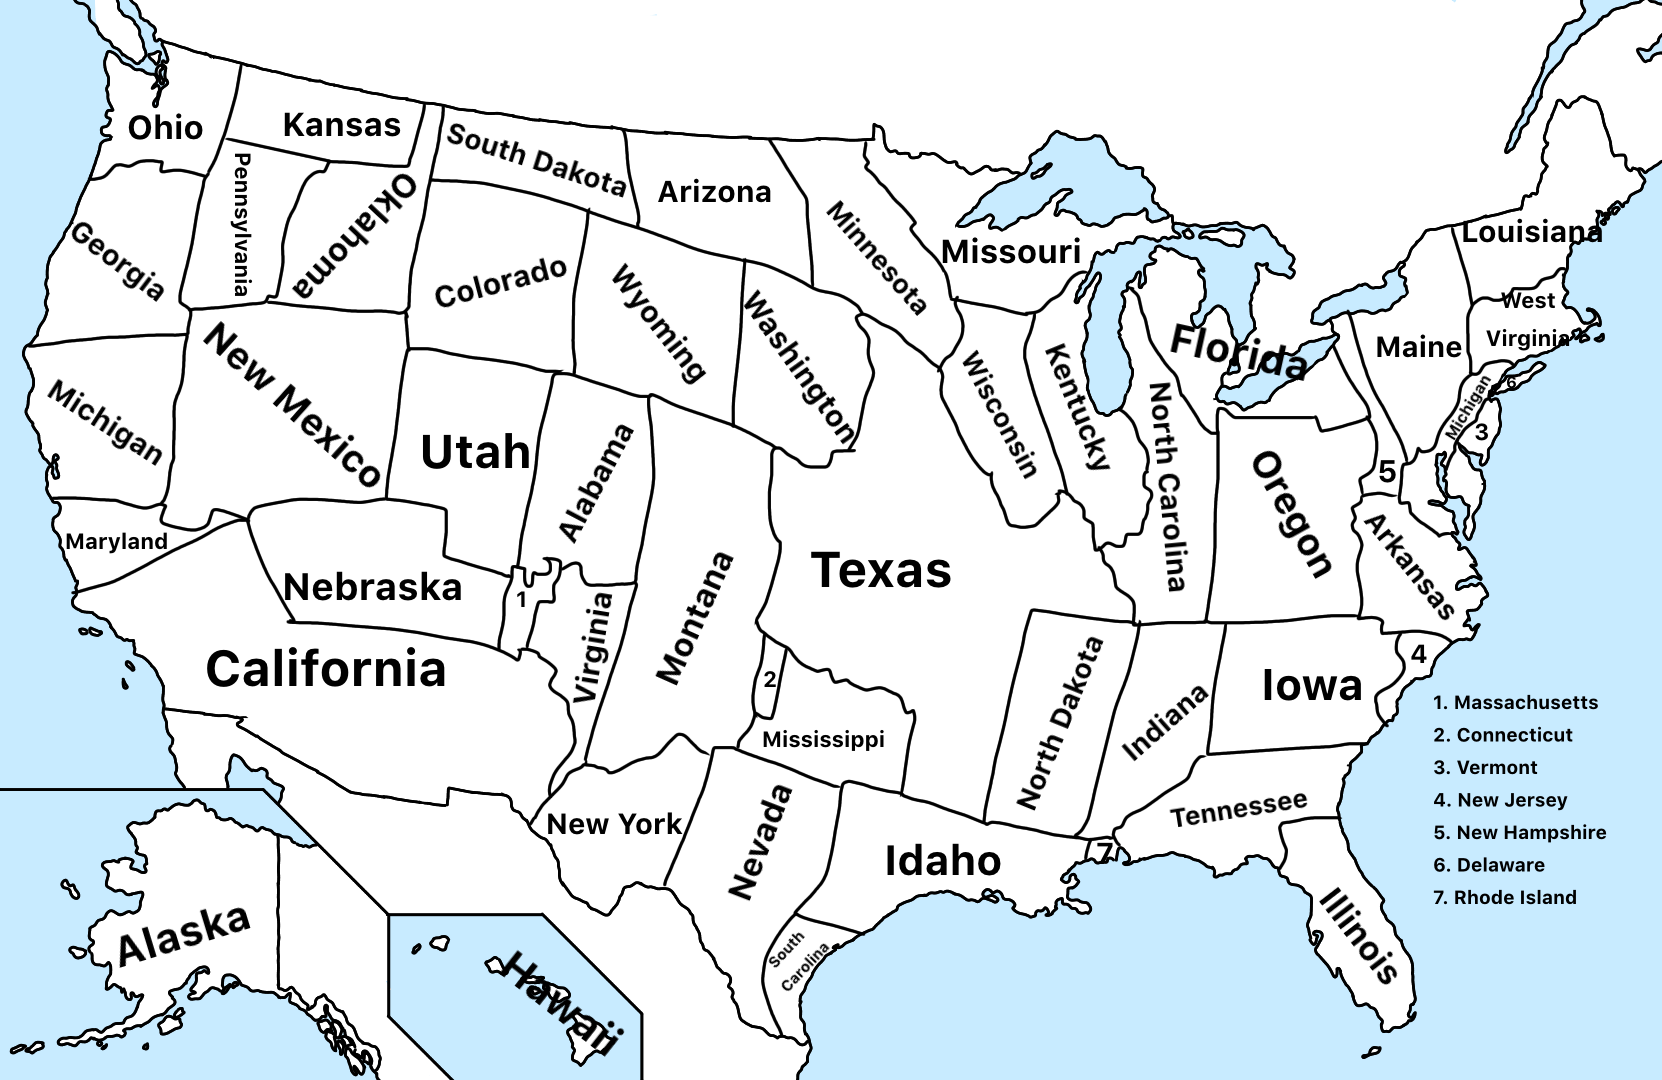 High Quality Map of the United States. Blank Meme Template